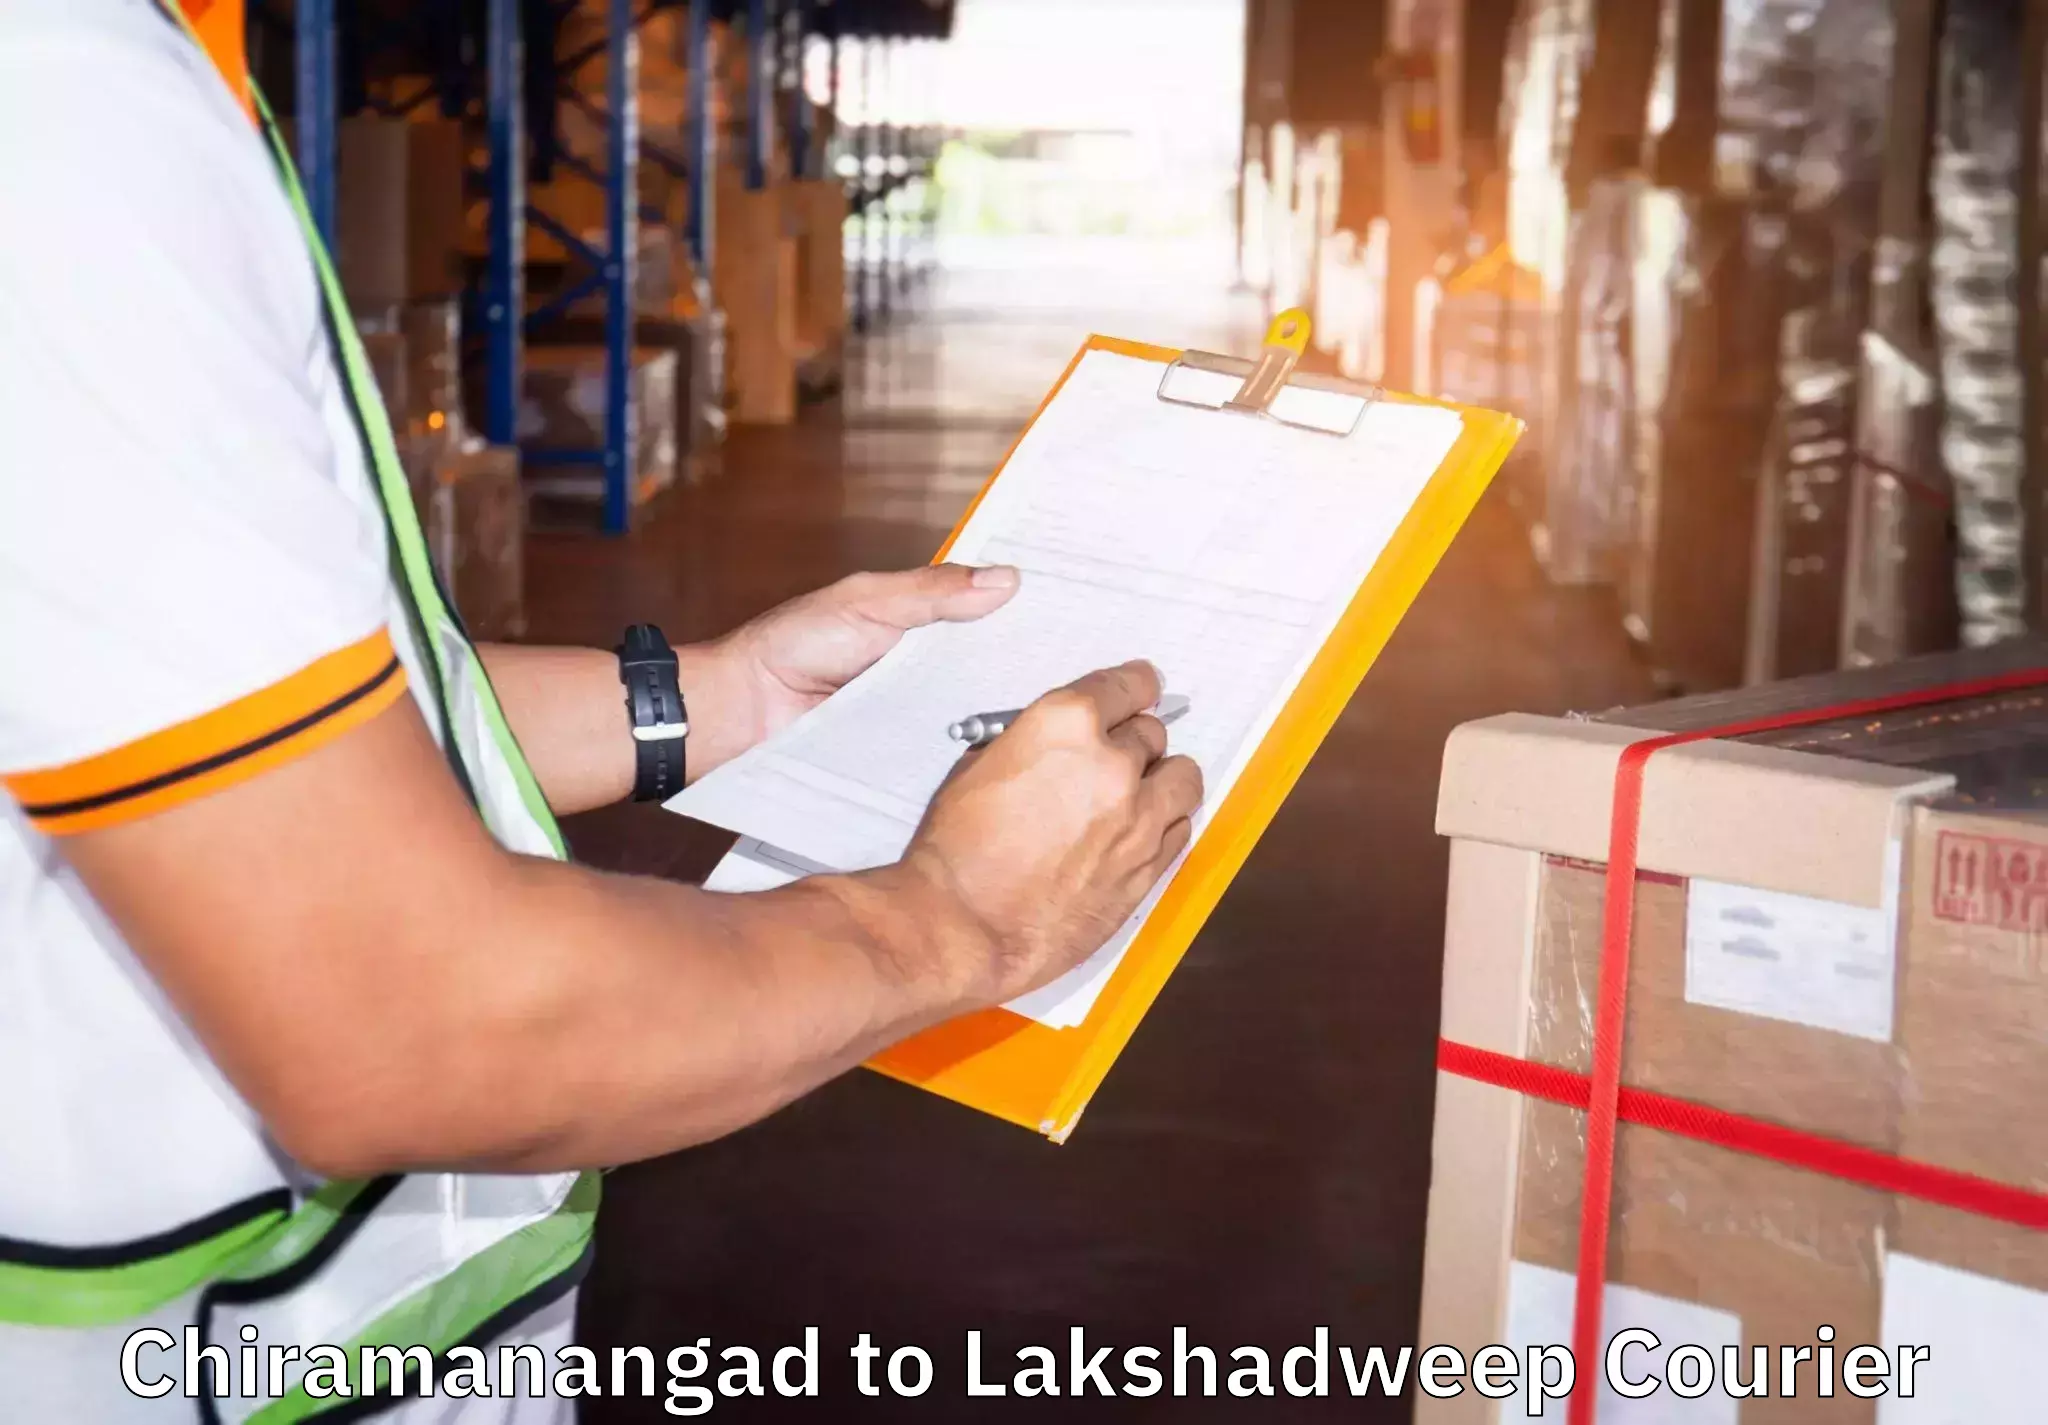 Reliable goods transport in Chiramanangad to Lakshadweep